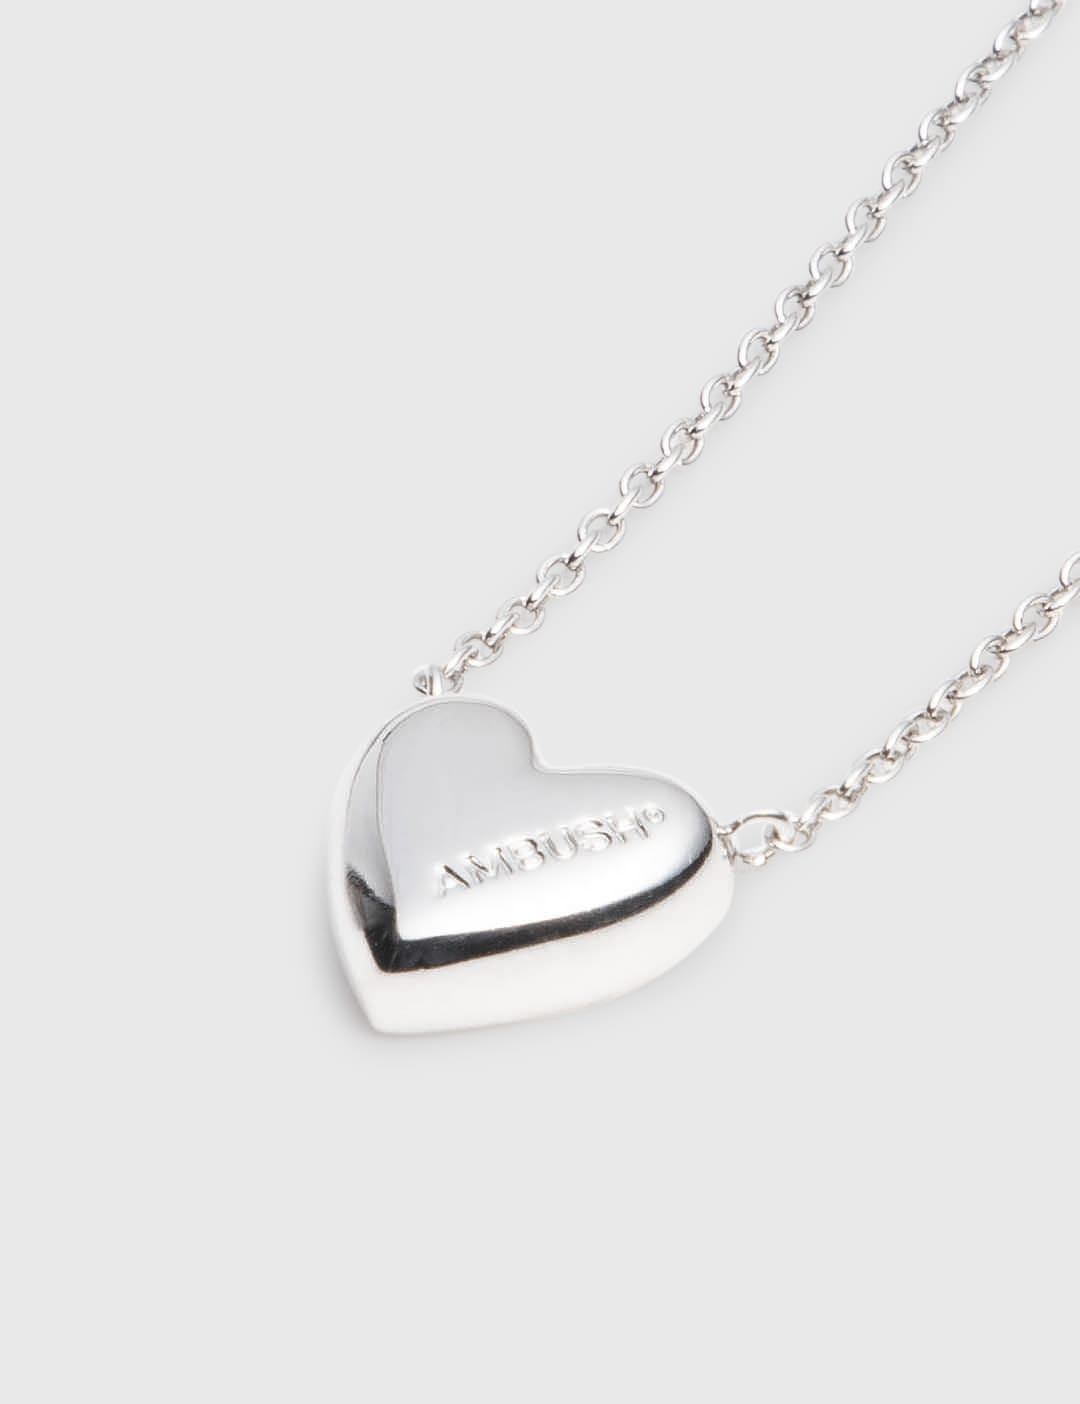 HEART CHARM NECKLACE